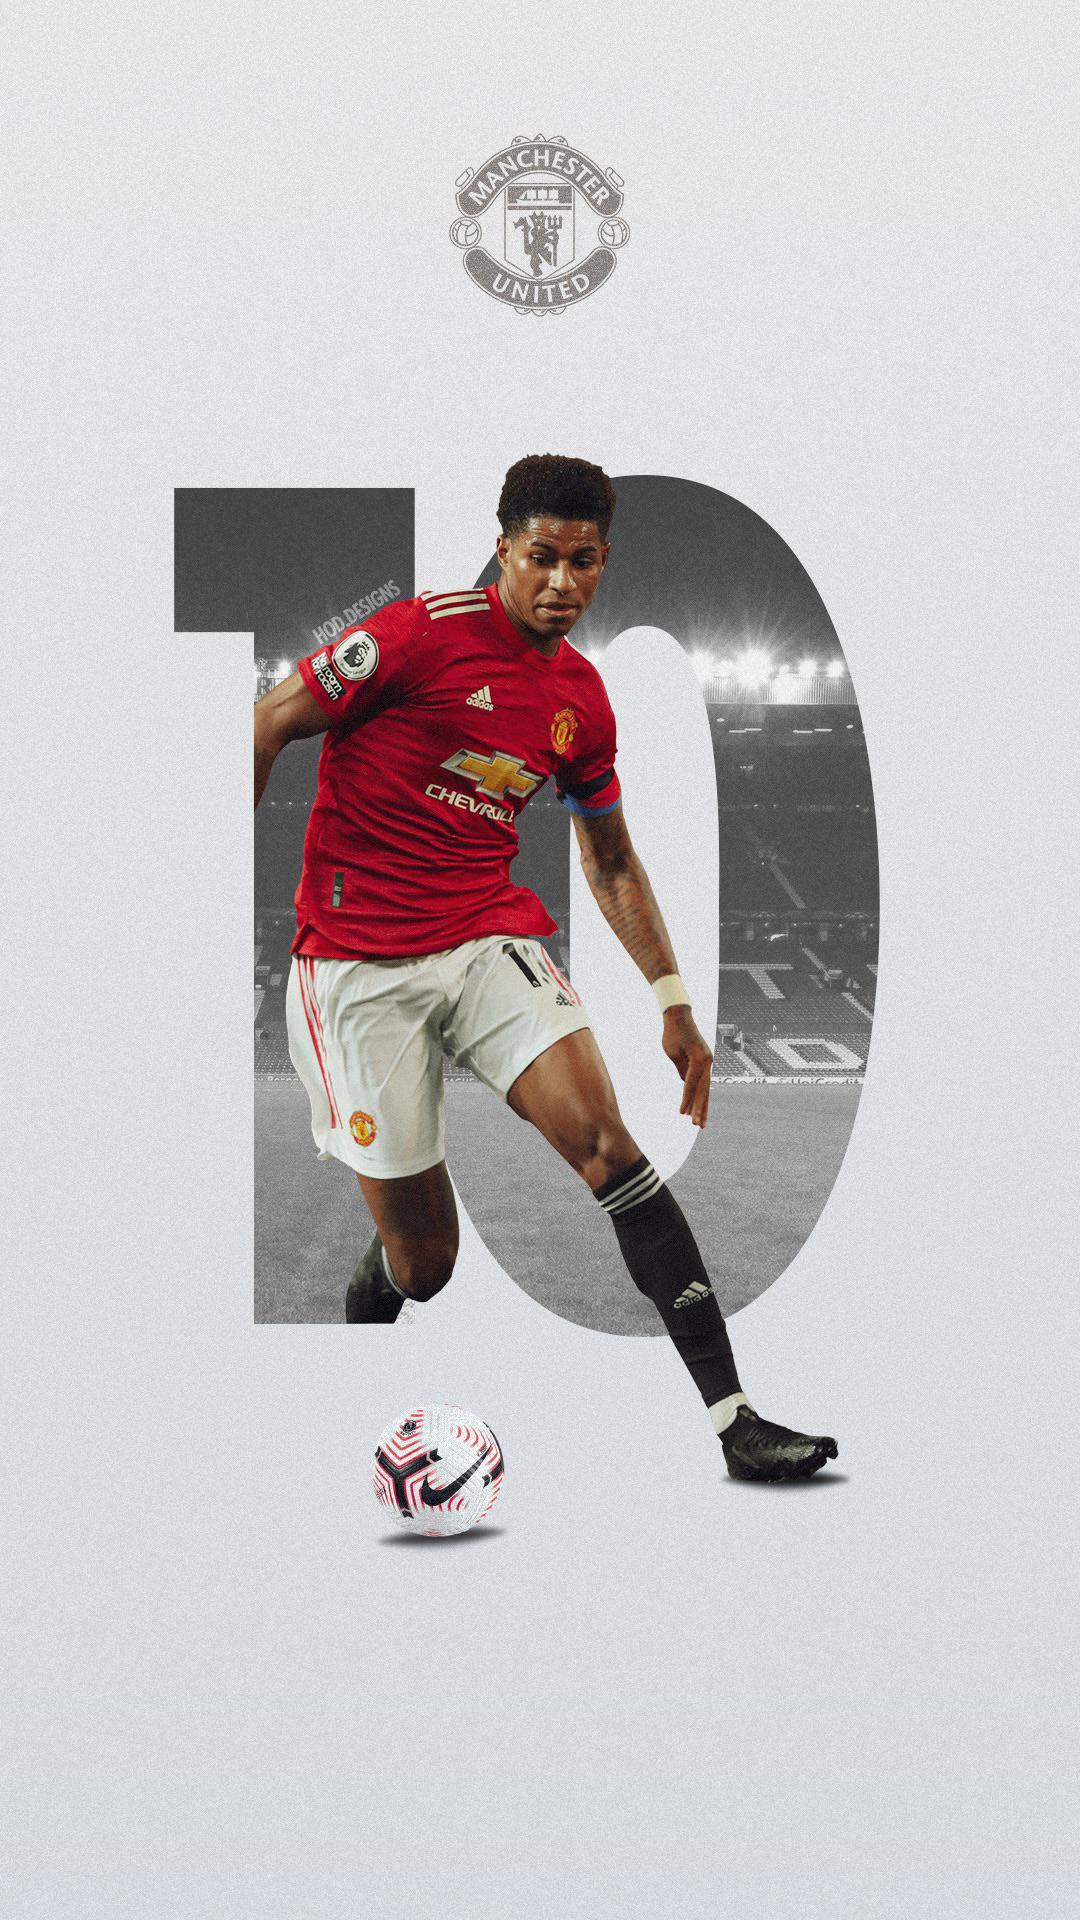 Marcus Rashford wallpaper that I made. Feel free to use it if any of you want to! Any feedback appreciated. My Instagram's Cheers guys!